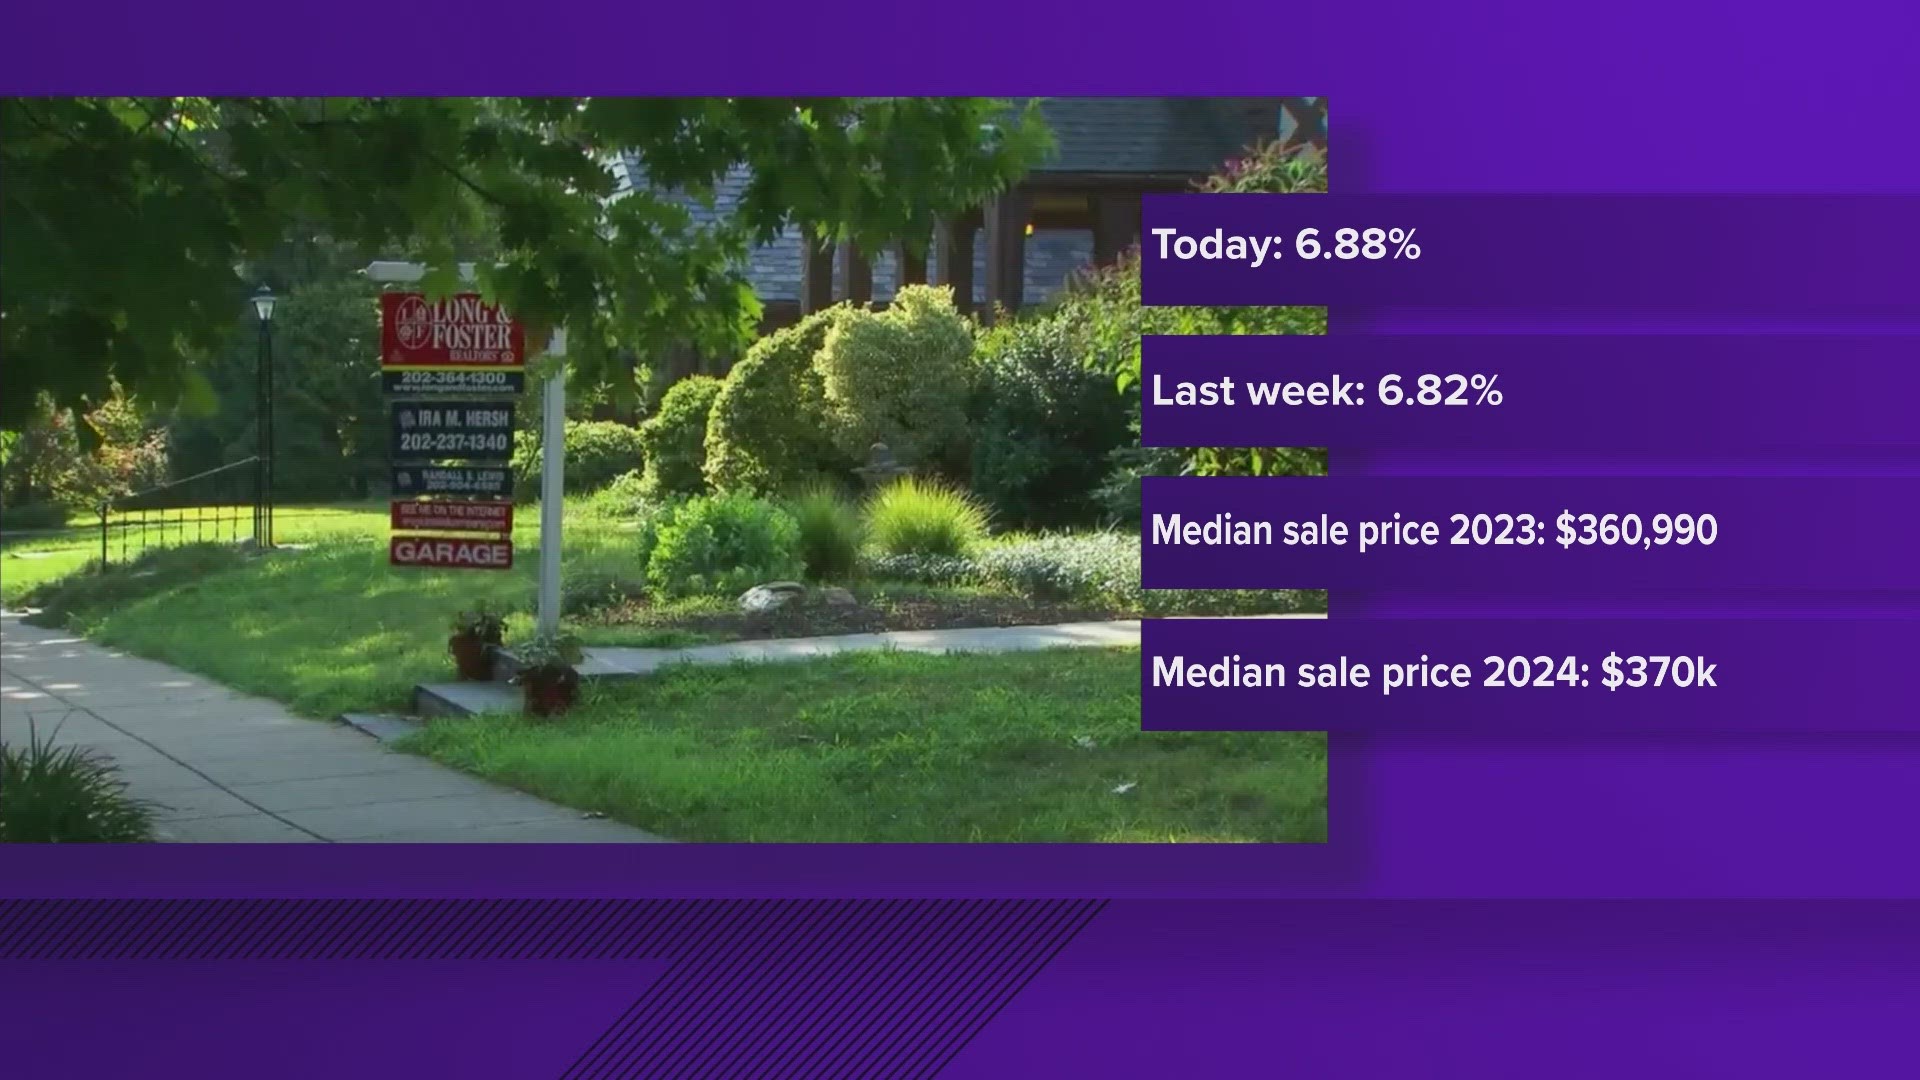 Spiking numbers are forcing home prices in North Texas to reach sky-high figures.